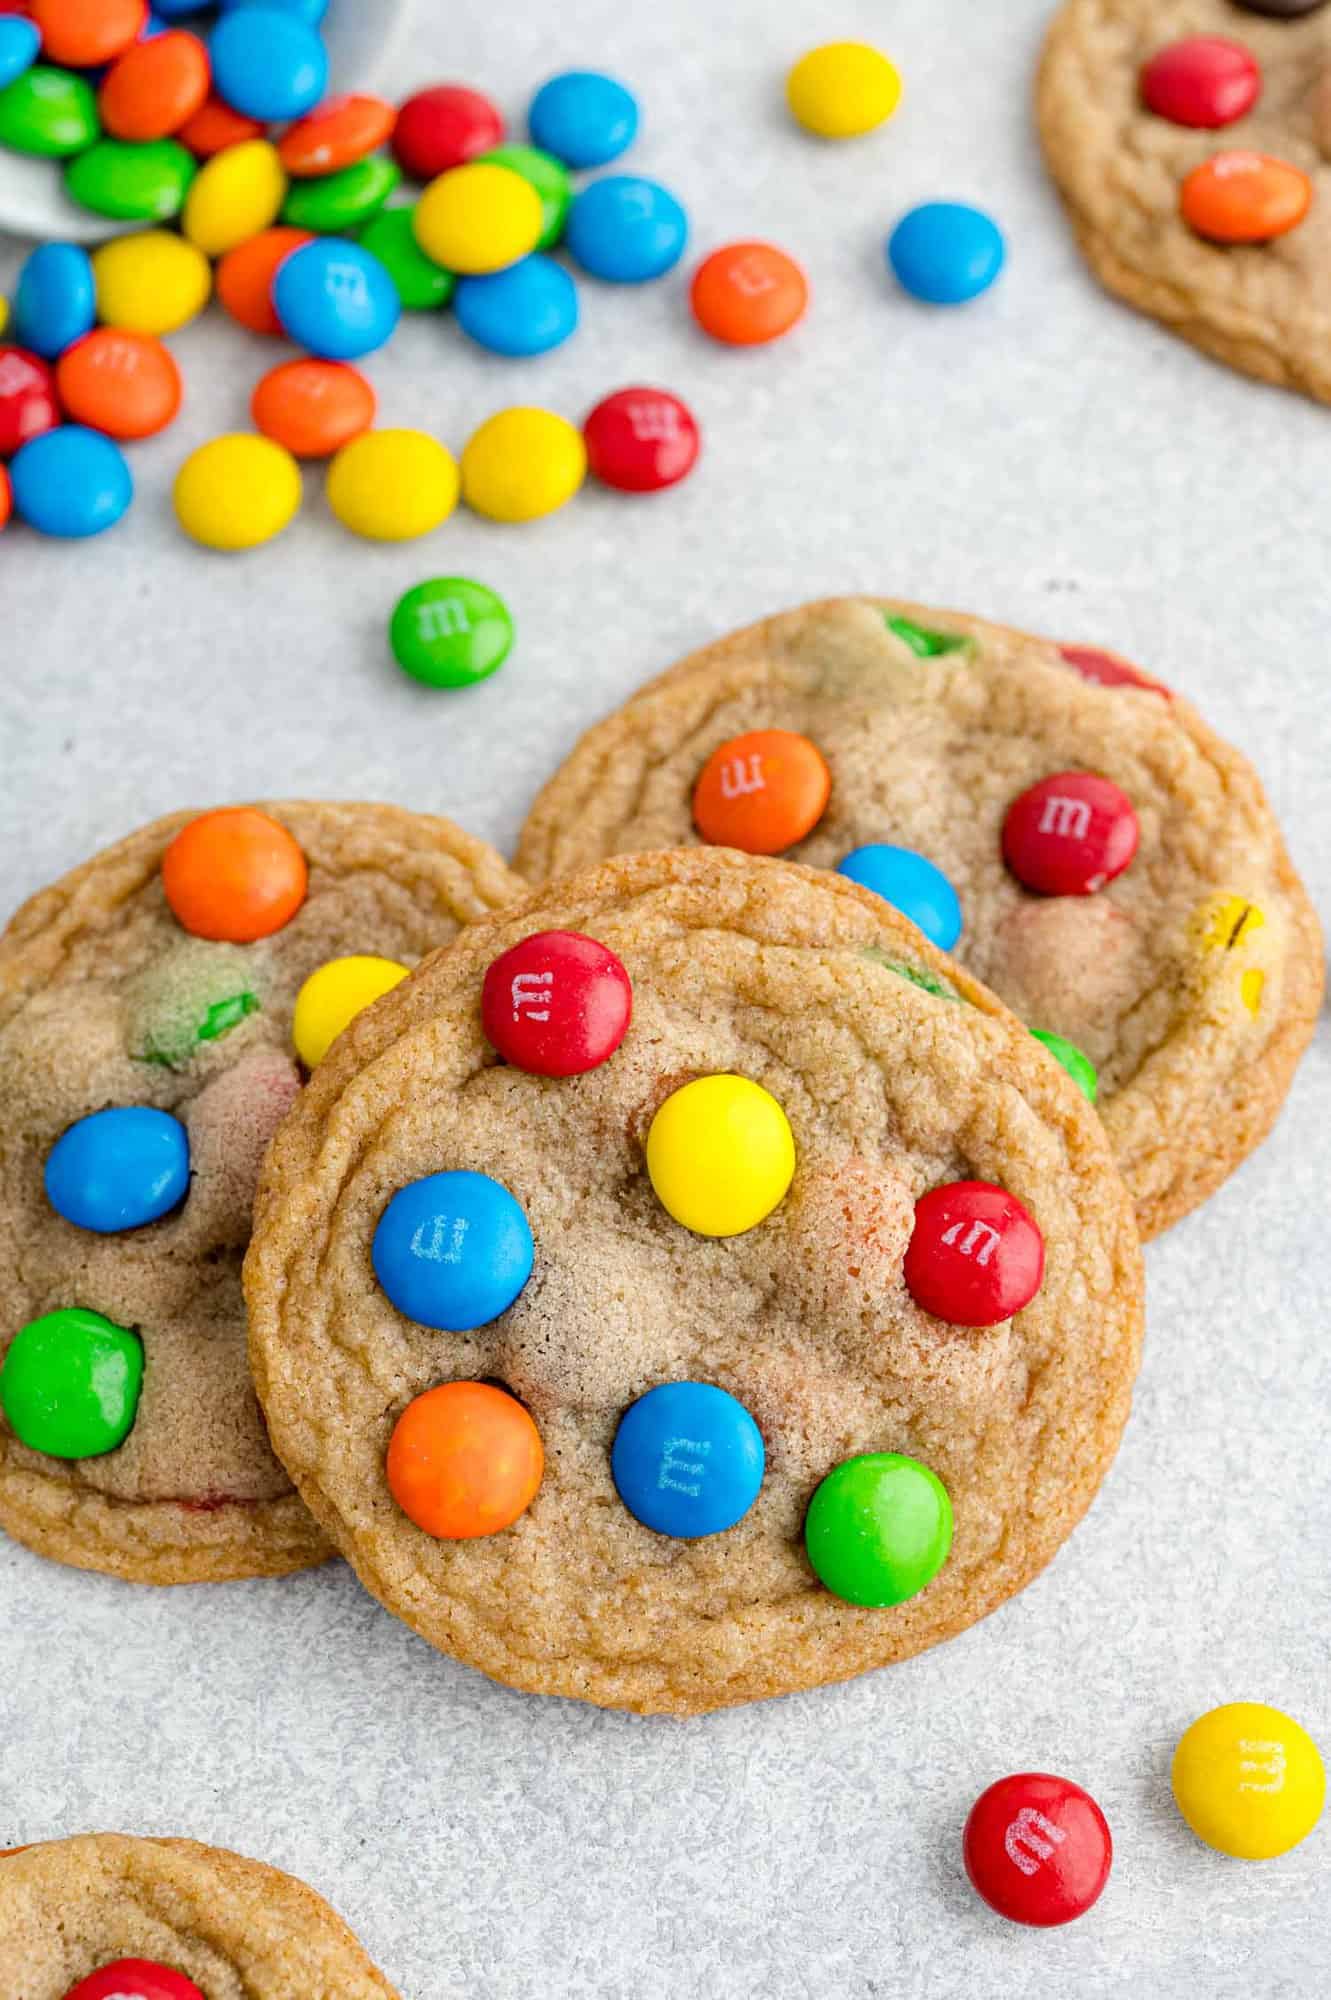 M&M Cookies with additional M&Ms in background.